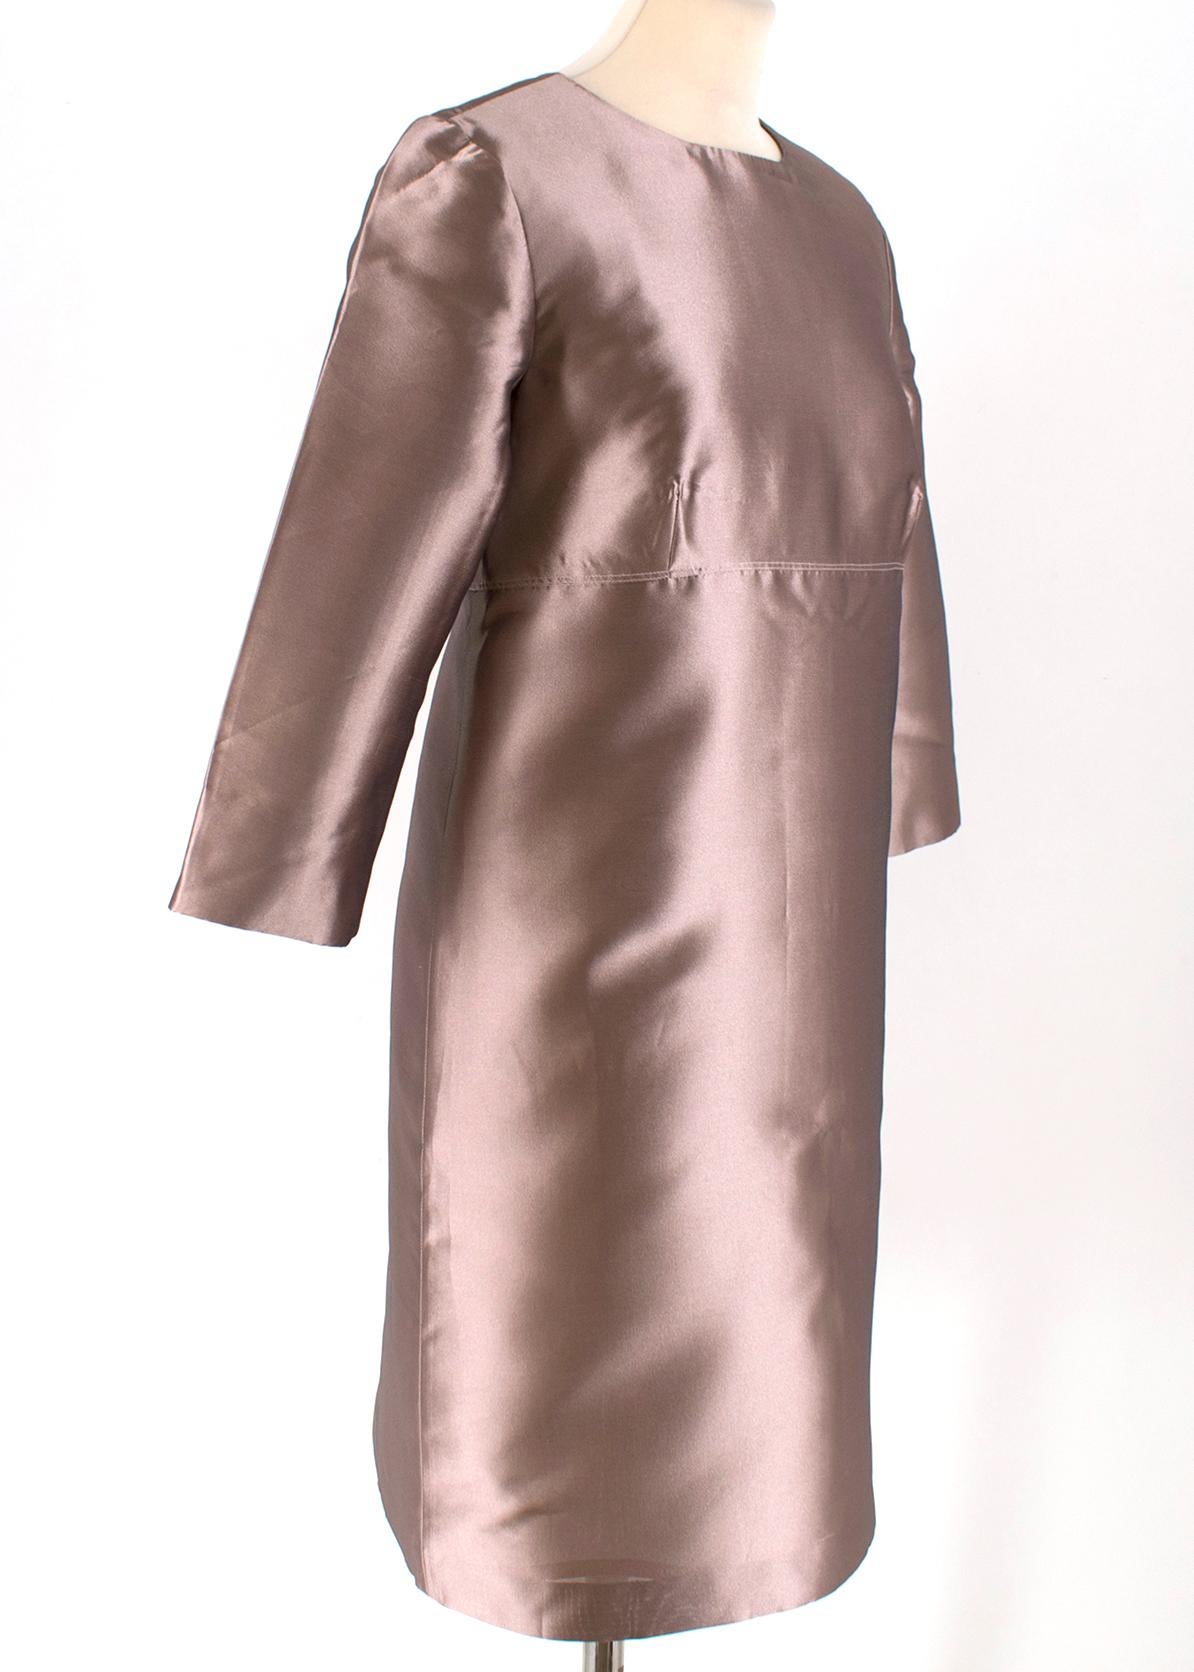 Burberry Dusty Pink Silk Satin Shift Dress

- Silk blend dust pink dress
- Medium Length
- 3/4 sleeve
- Round neck
- Hidden white zip fastening to the back 
- Silk lining

Please note, these items are pre-owned and may show some signs of storage,